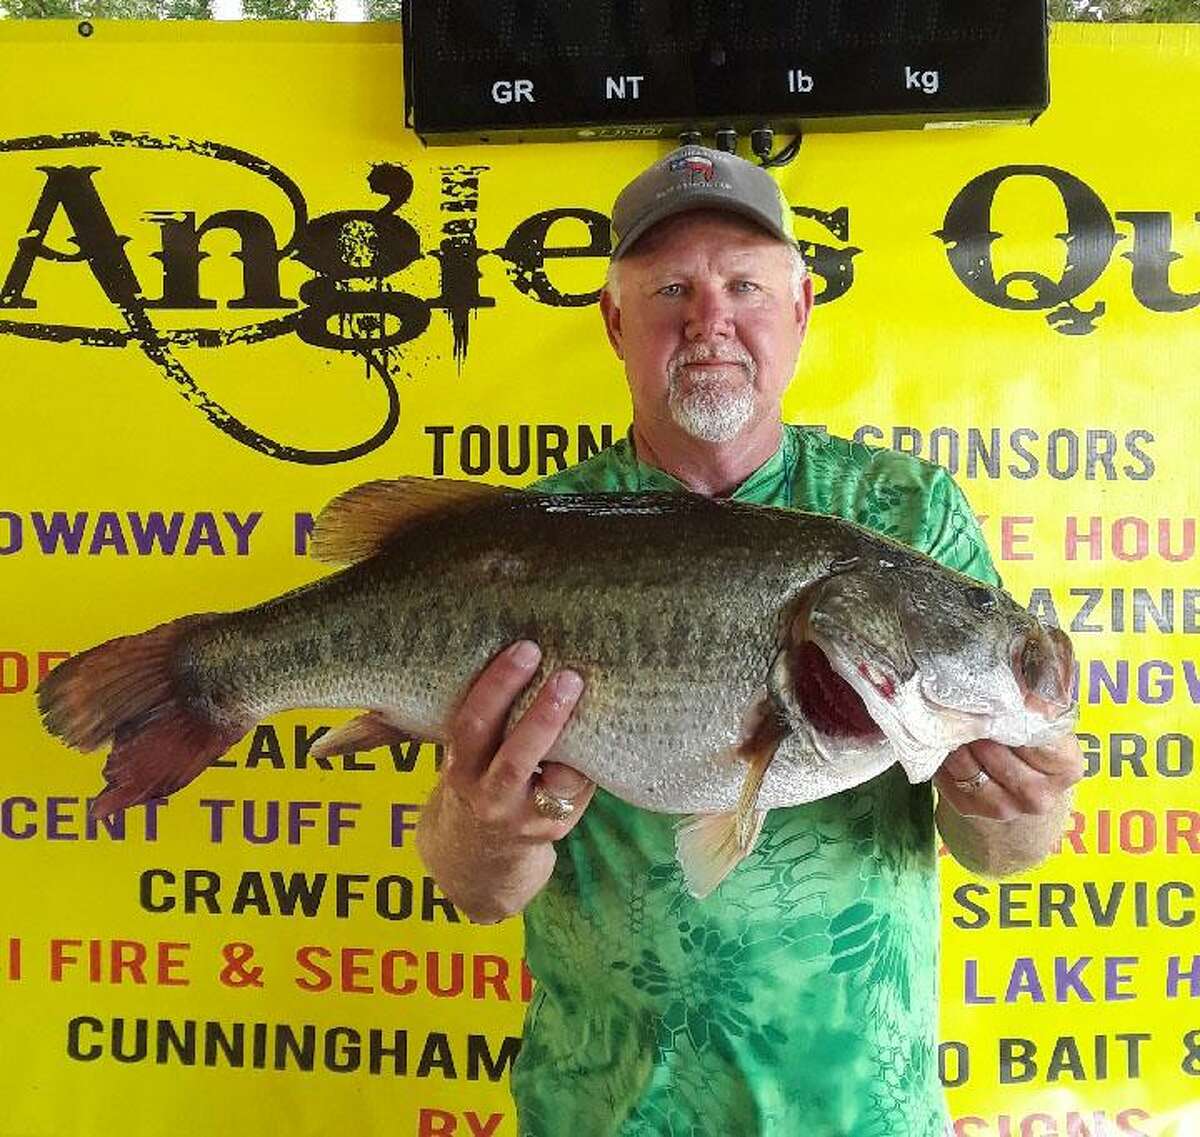 Jimmy Cole and Randy Gunter (pictured) weighed in the big bass in the Anglers Quest Team Tournament #6 that tipped the scales at11.14 pounds.